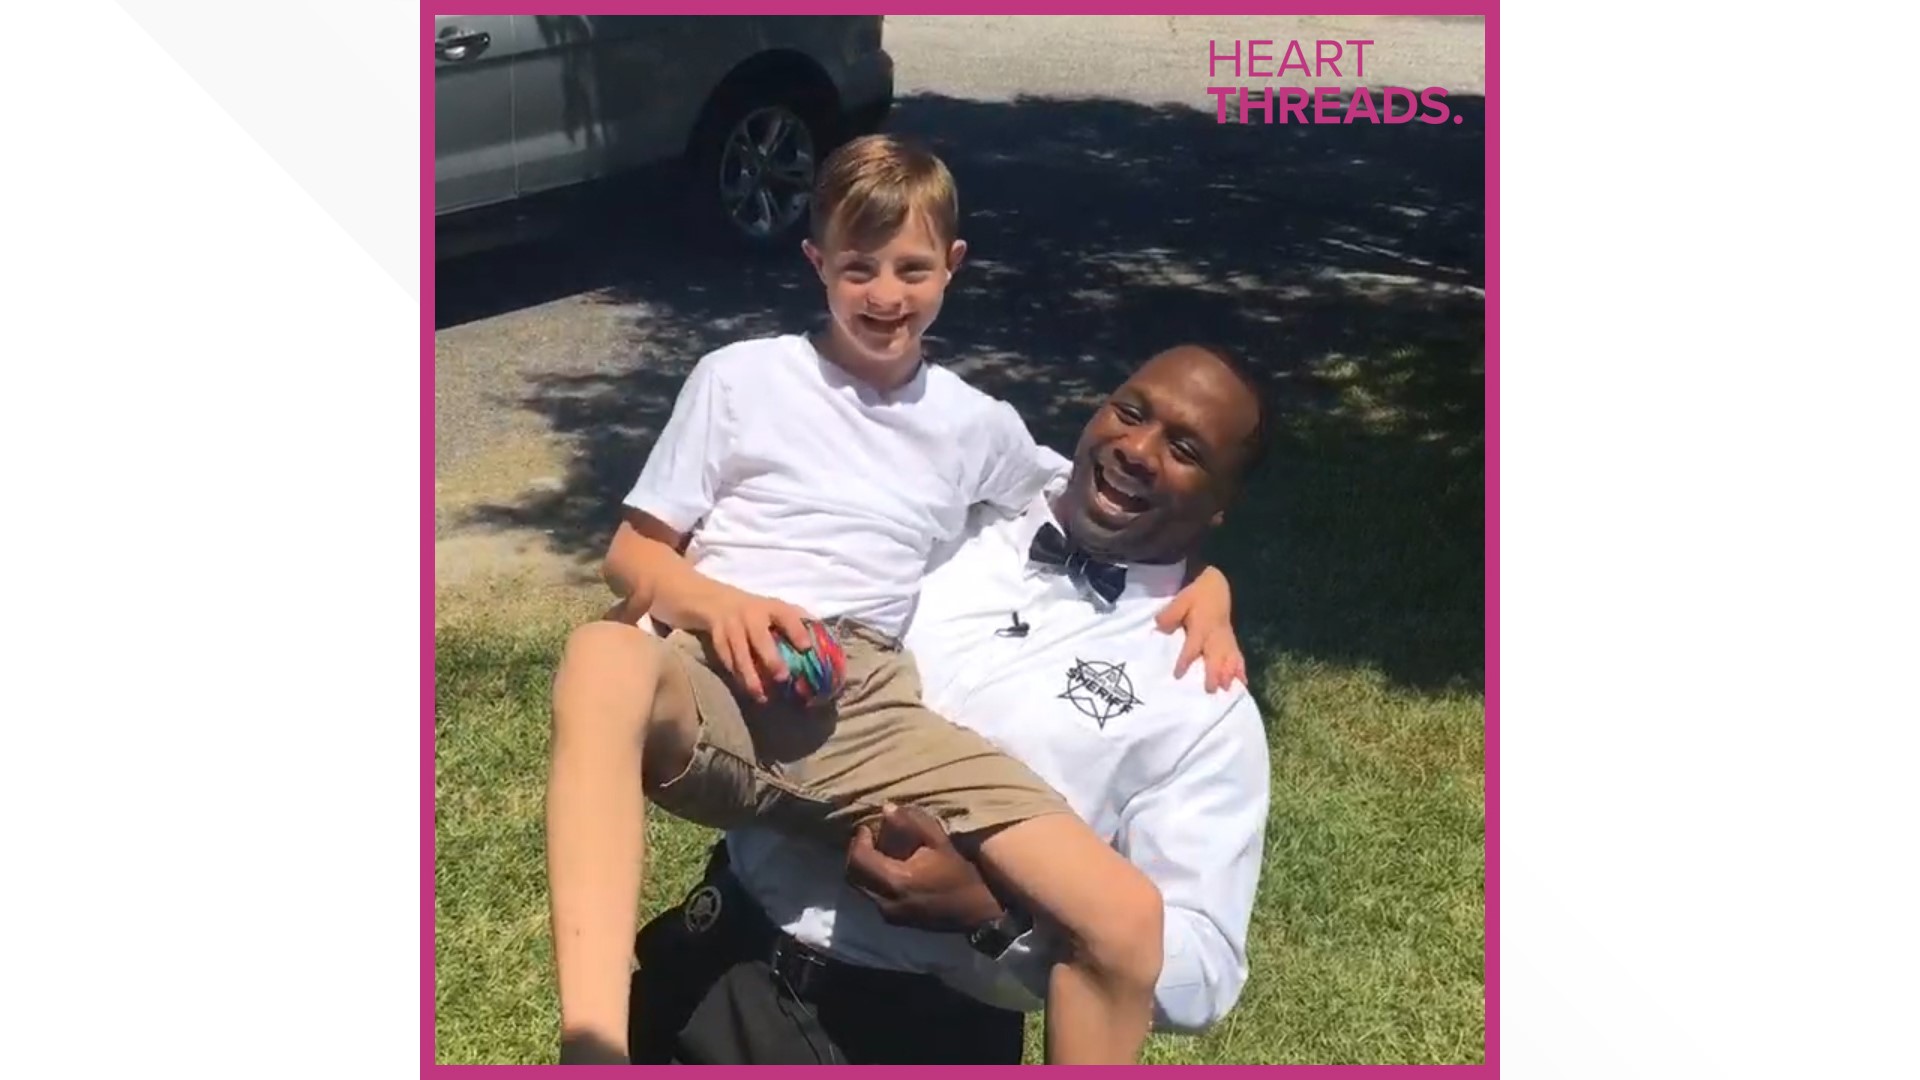 Demetrius Green was filling in as a school resource officer when Carter Haskins gave him a high five. It would be the start of an amazing friendship.